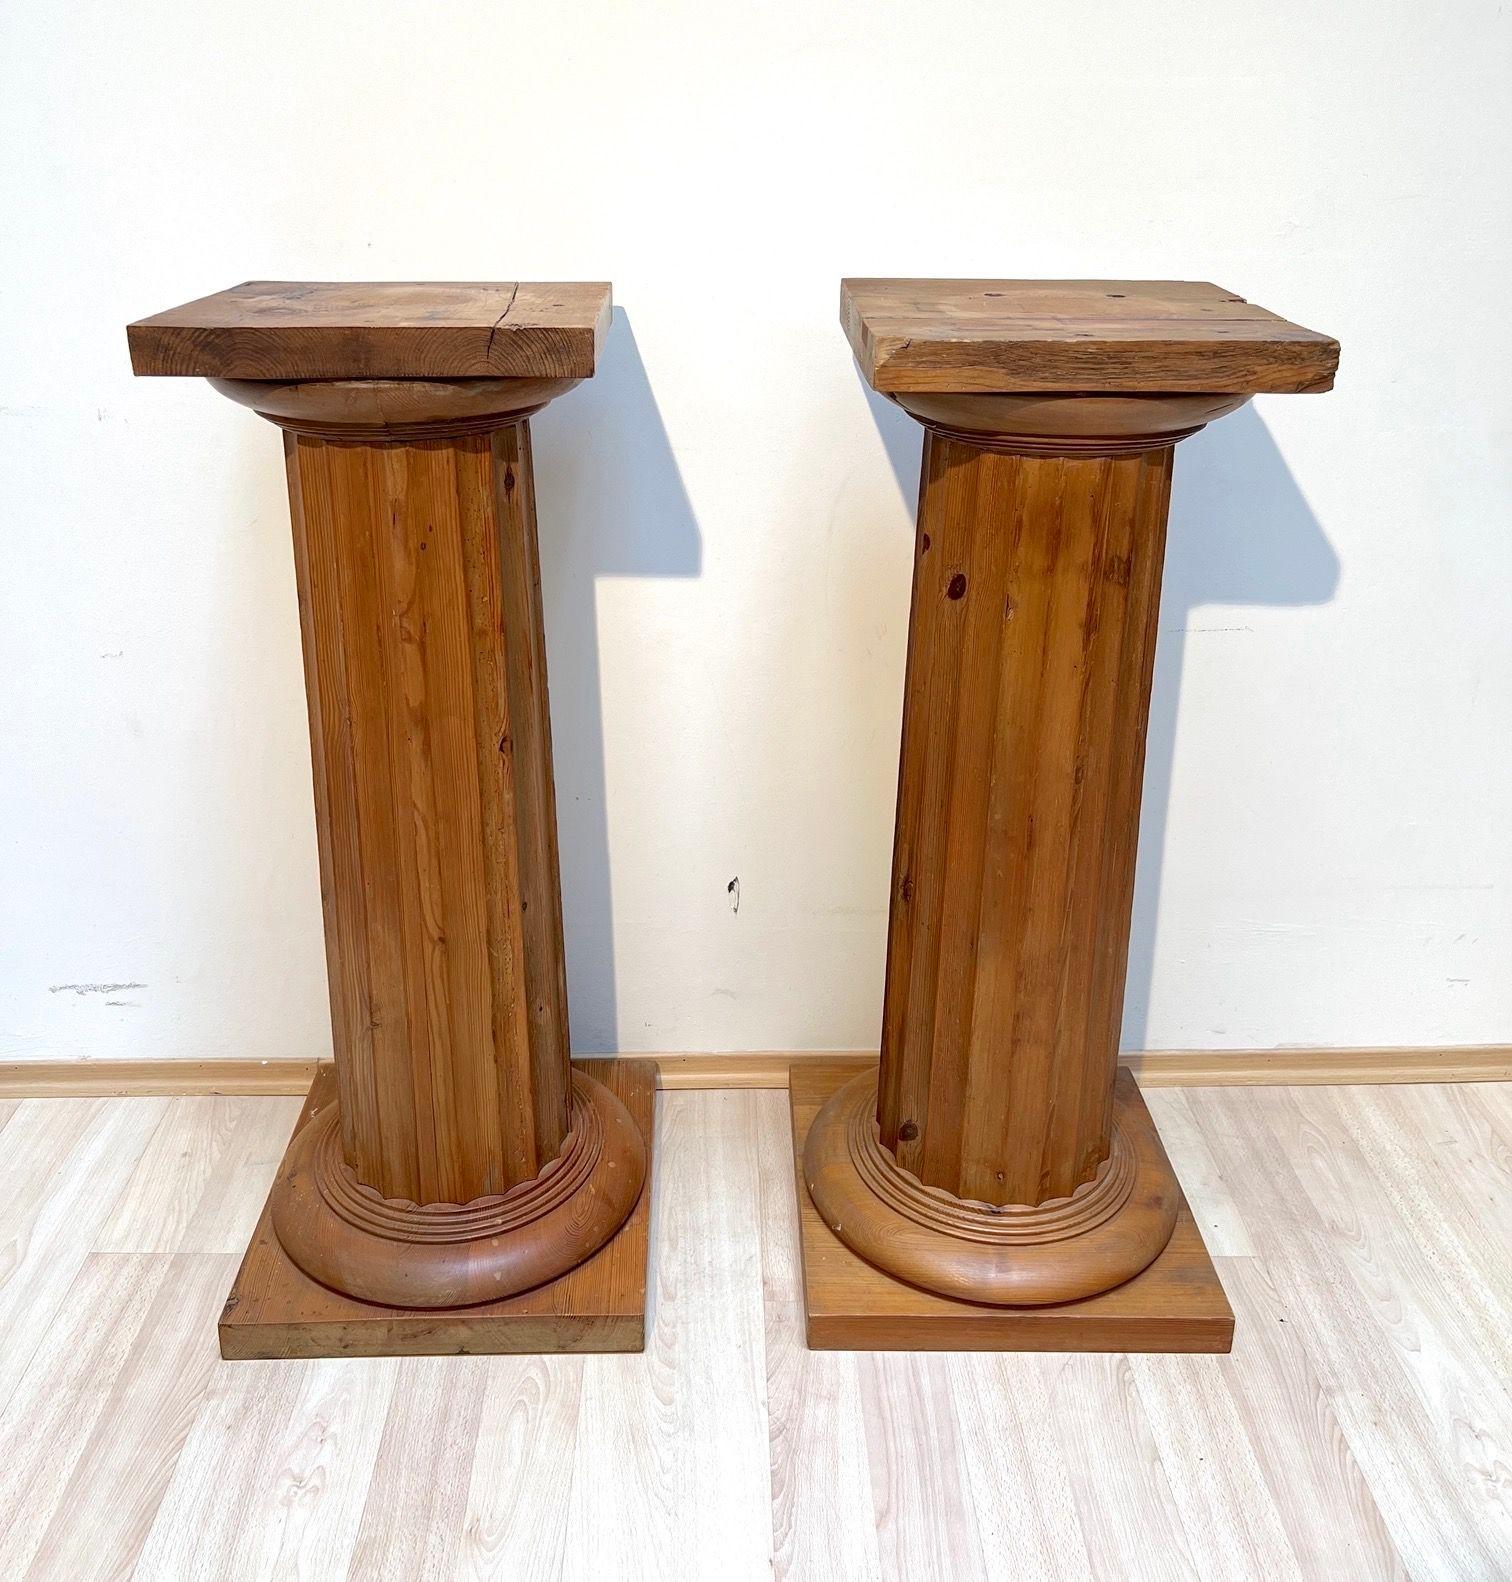 Neoclassical Revival Pair of large Neoclassical Columns, Pine Wood, France circa 1910 For Sale